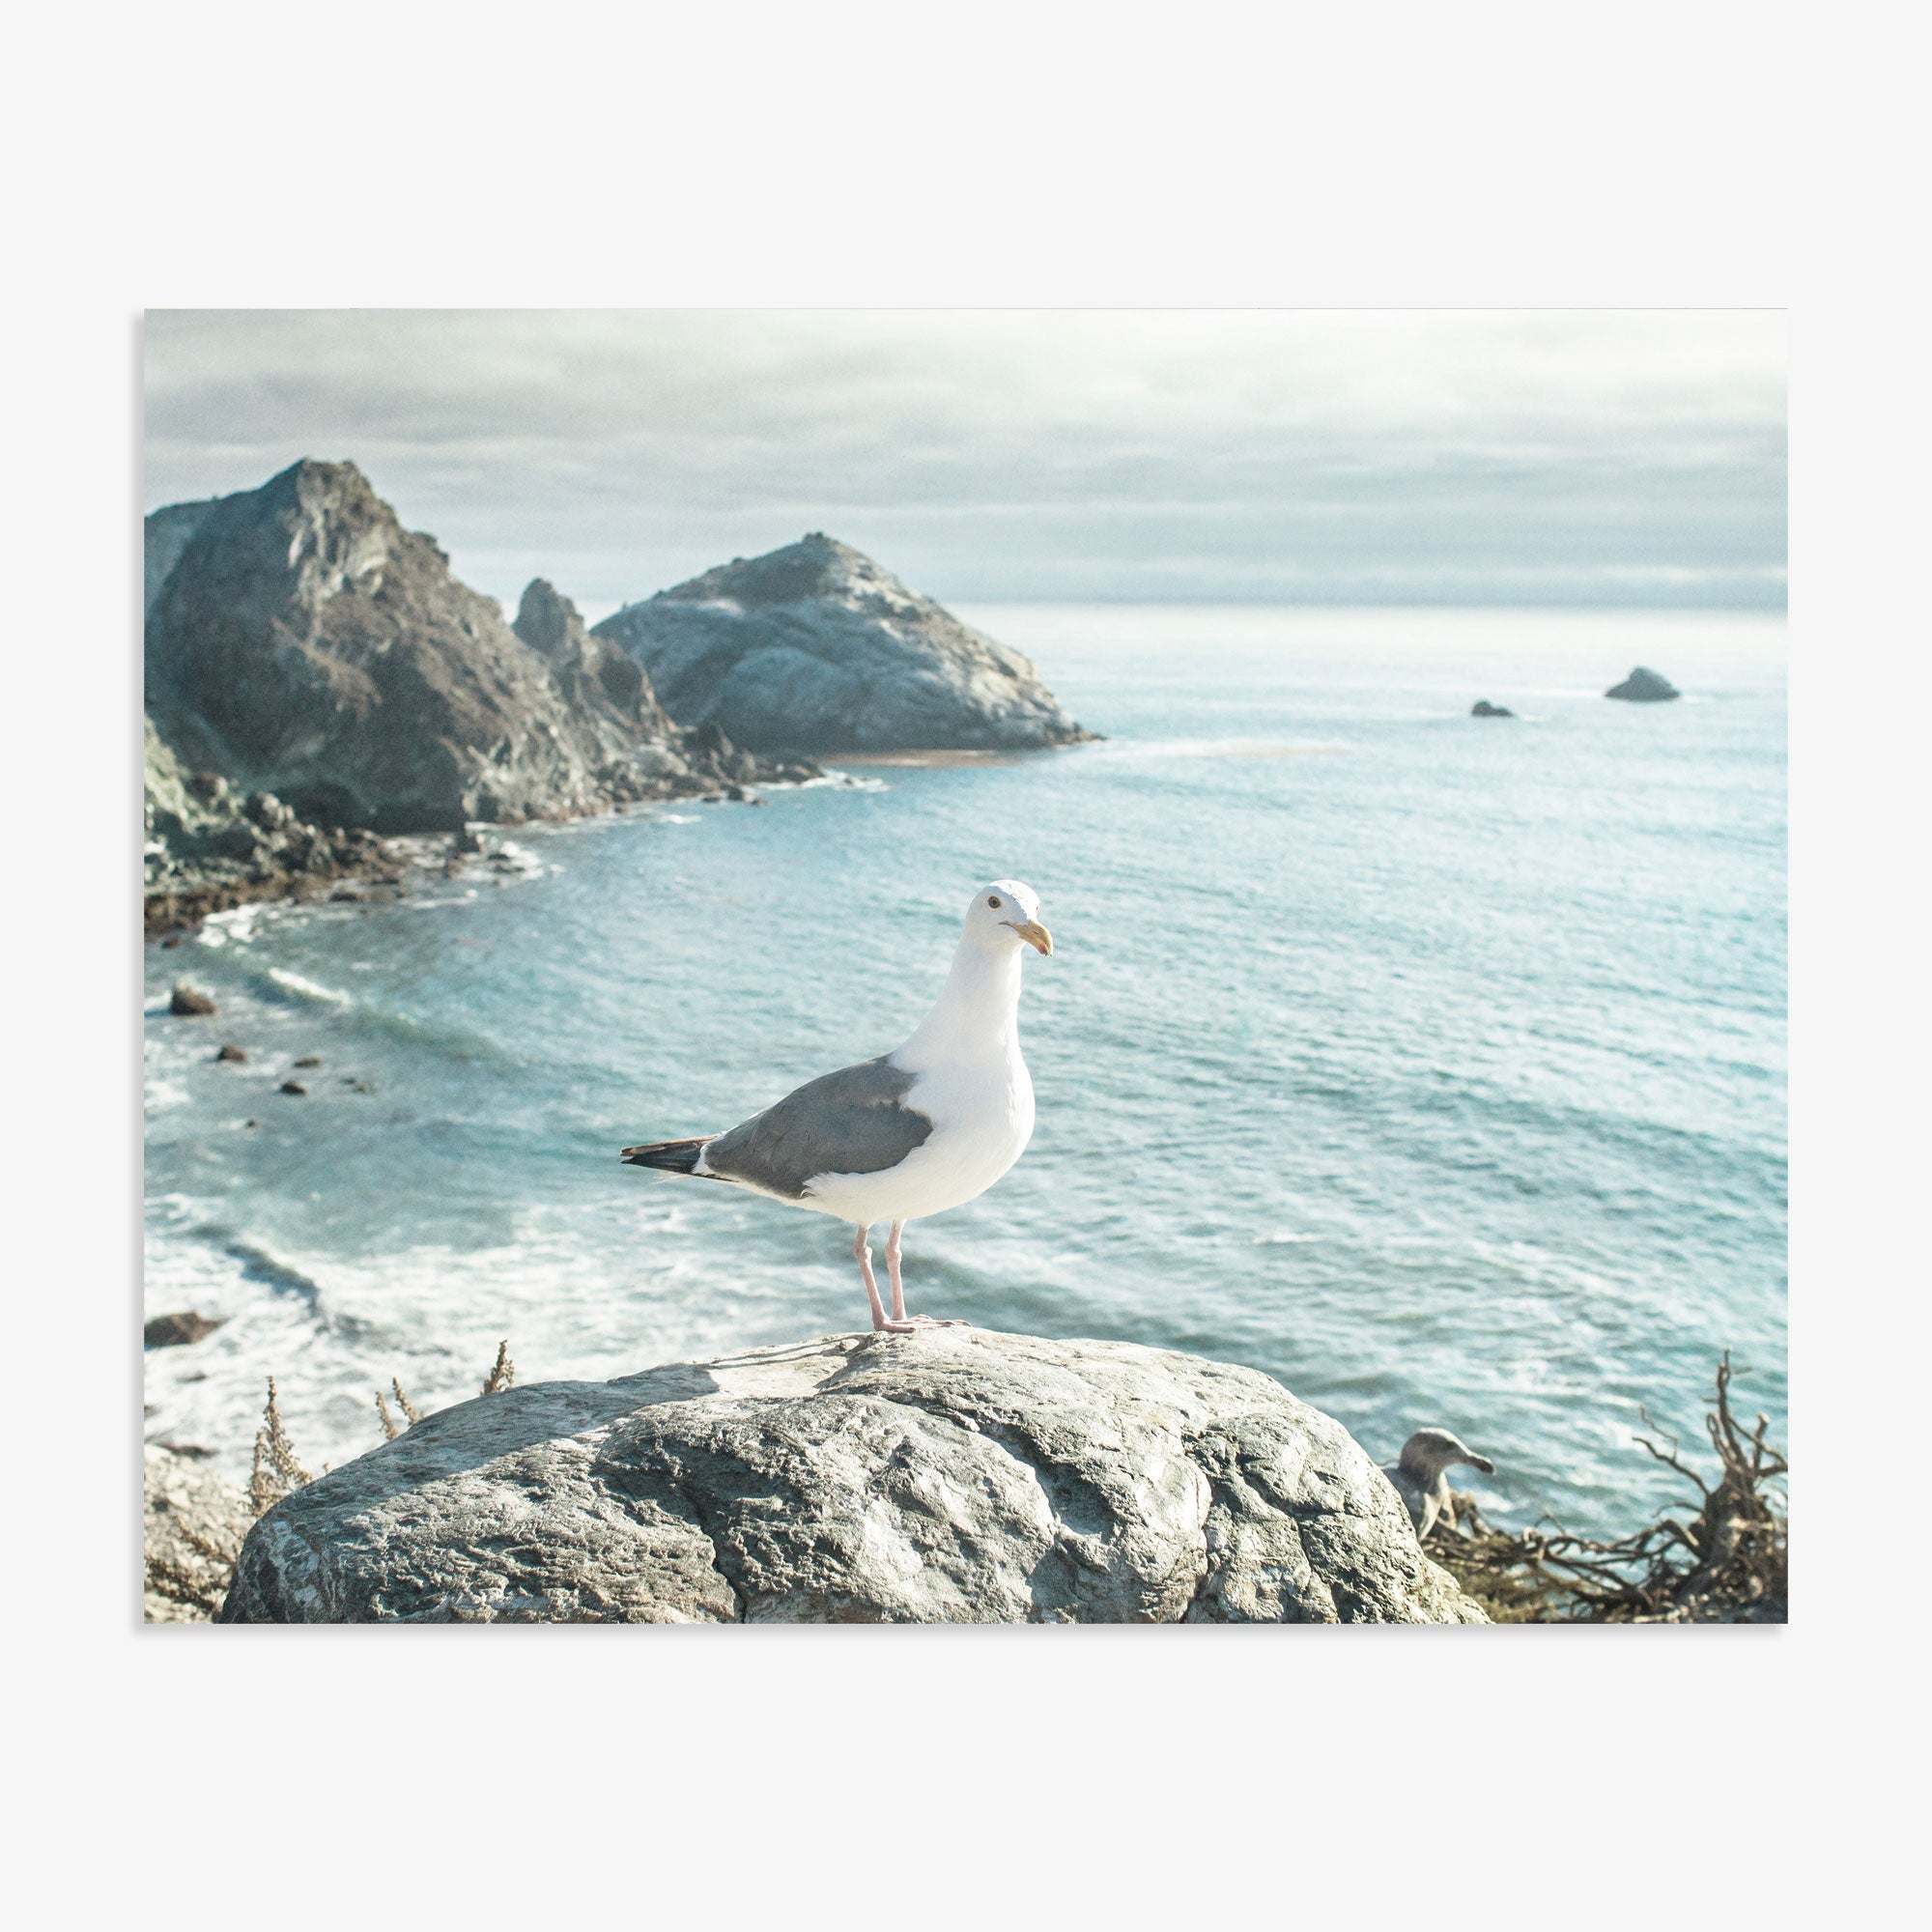 Photo of a seagull perched on a rock in front of a scenic coastline with rugged cliffs and calm sea waters, printed on archival photographic paper, hung on a line with clothespins. Offley Green&#39;s Big Sur Landscape Print, &#39;Lobster Mornay For Tea&#39;.